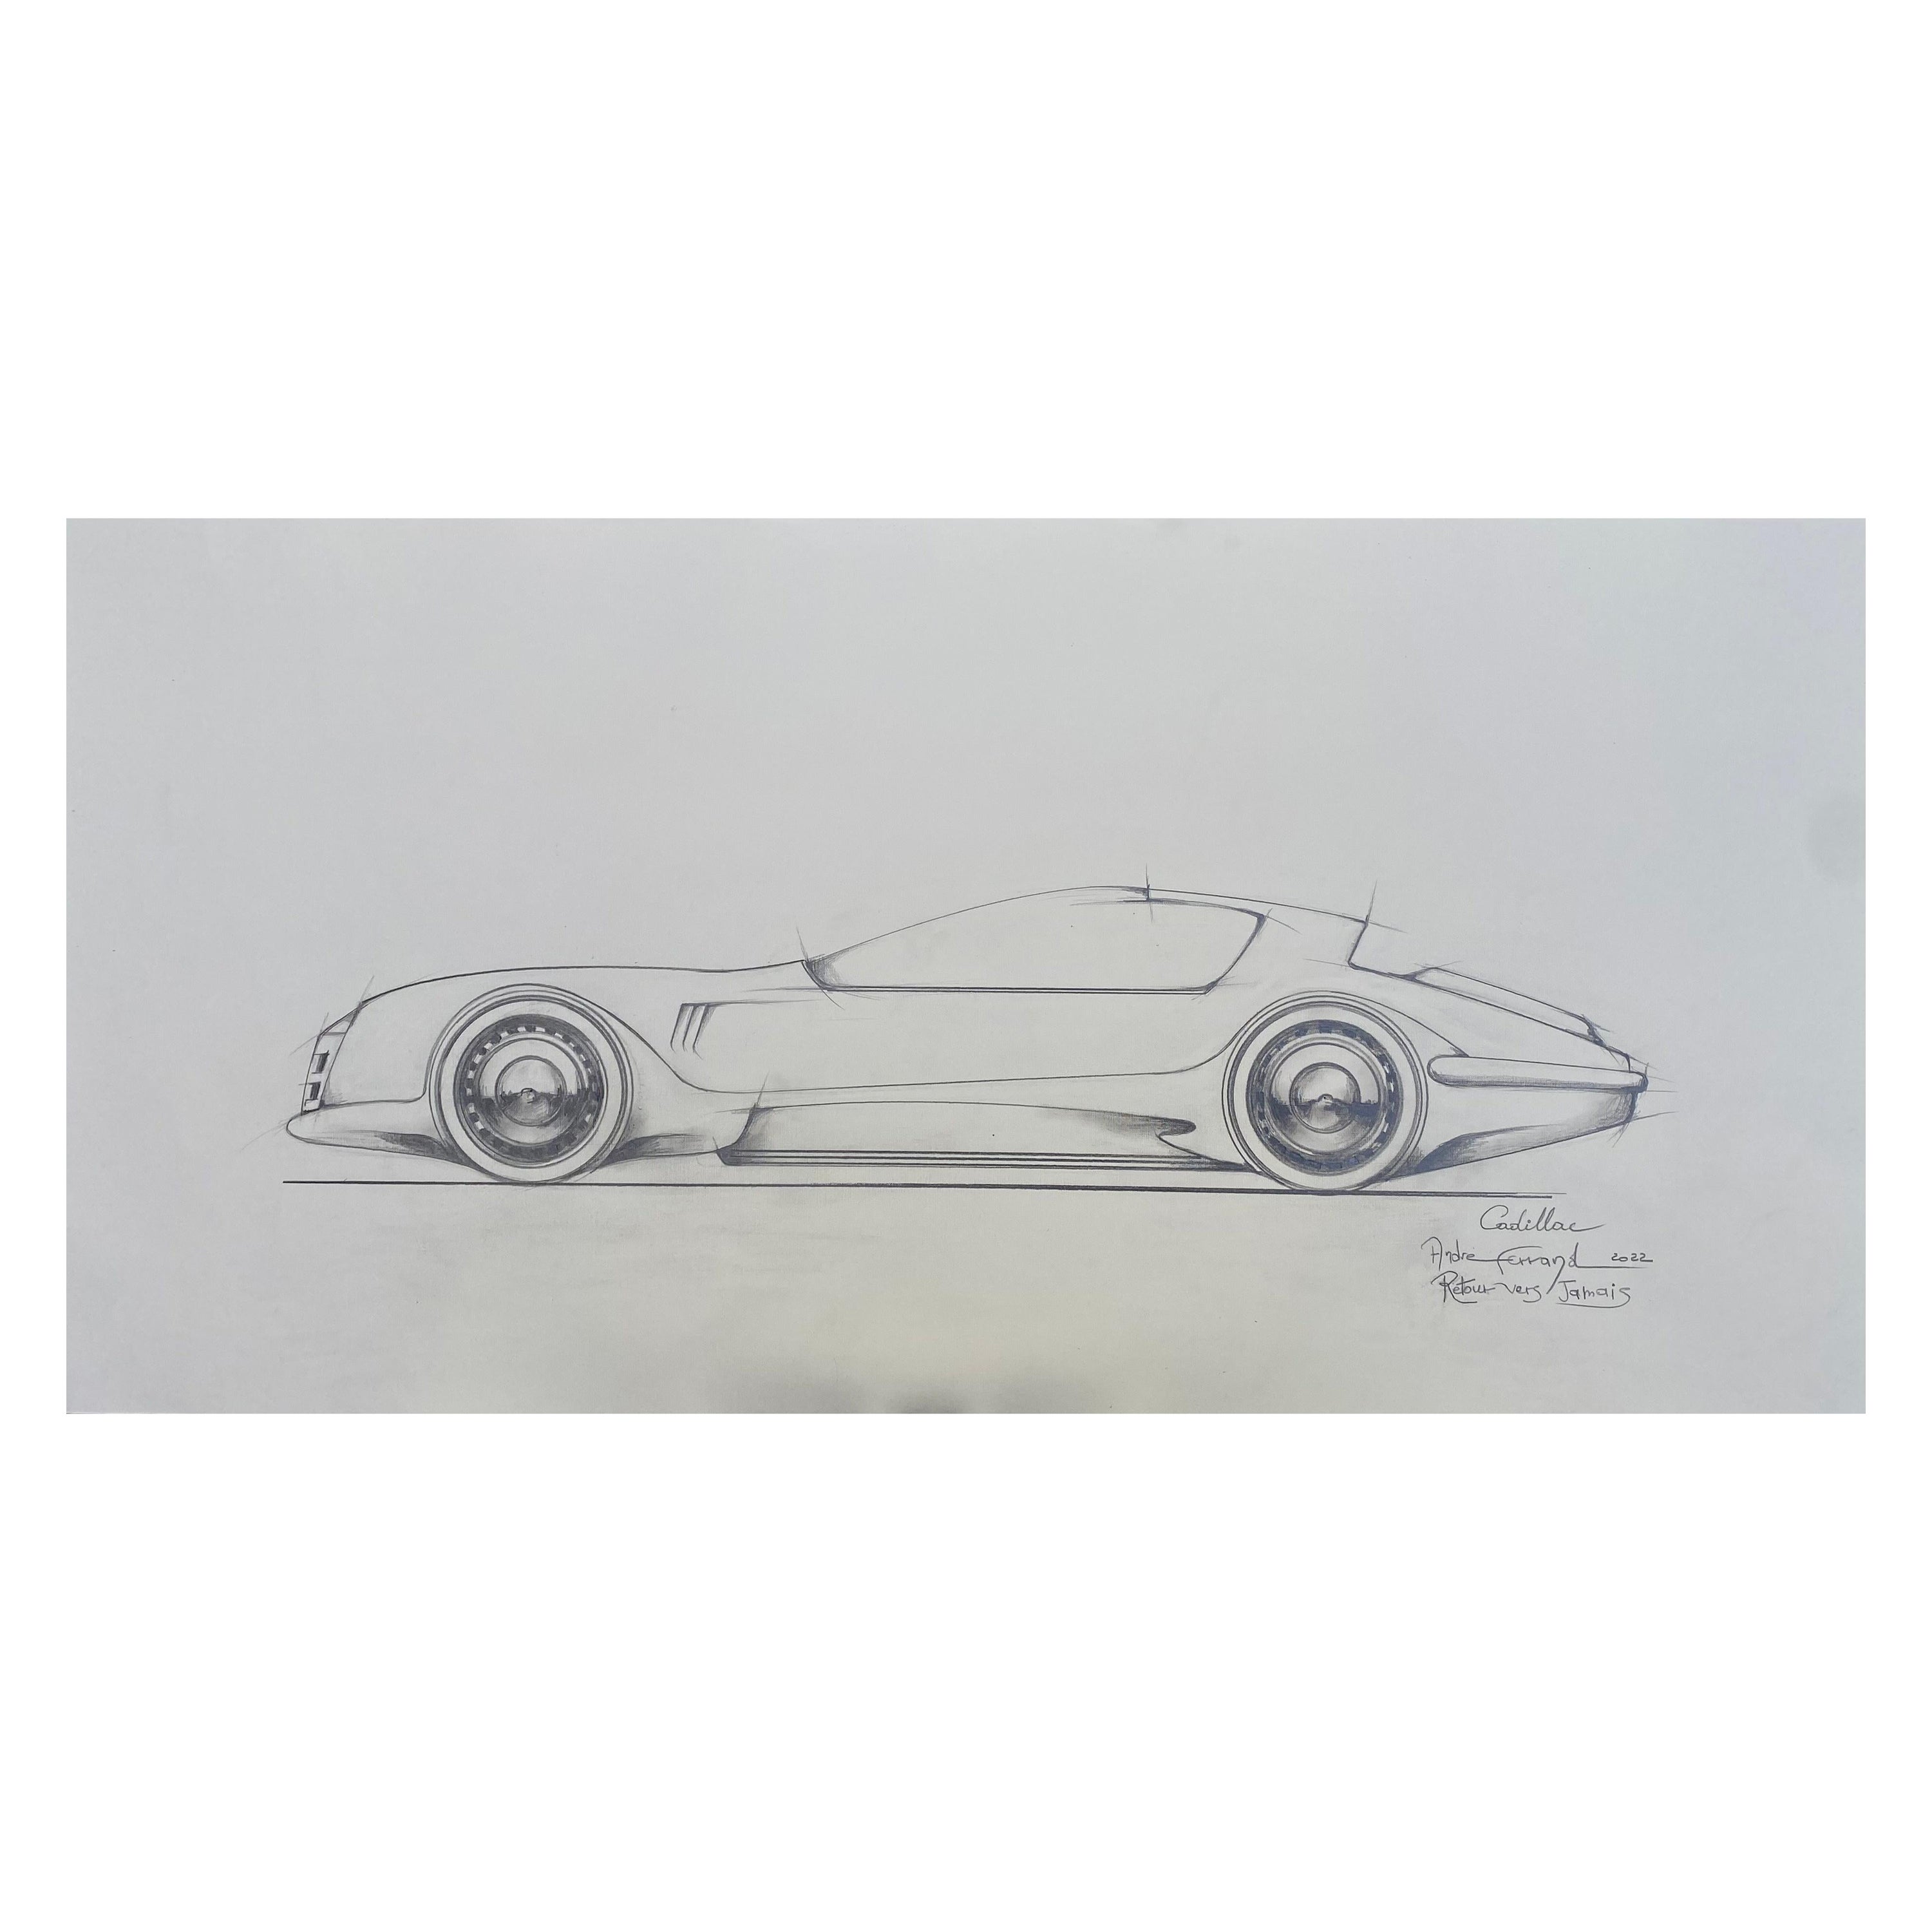 André Ferrand, Cadillac Drawing “Back to Never” For Sale